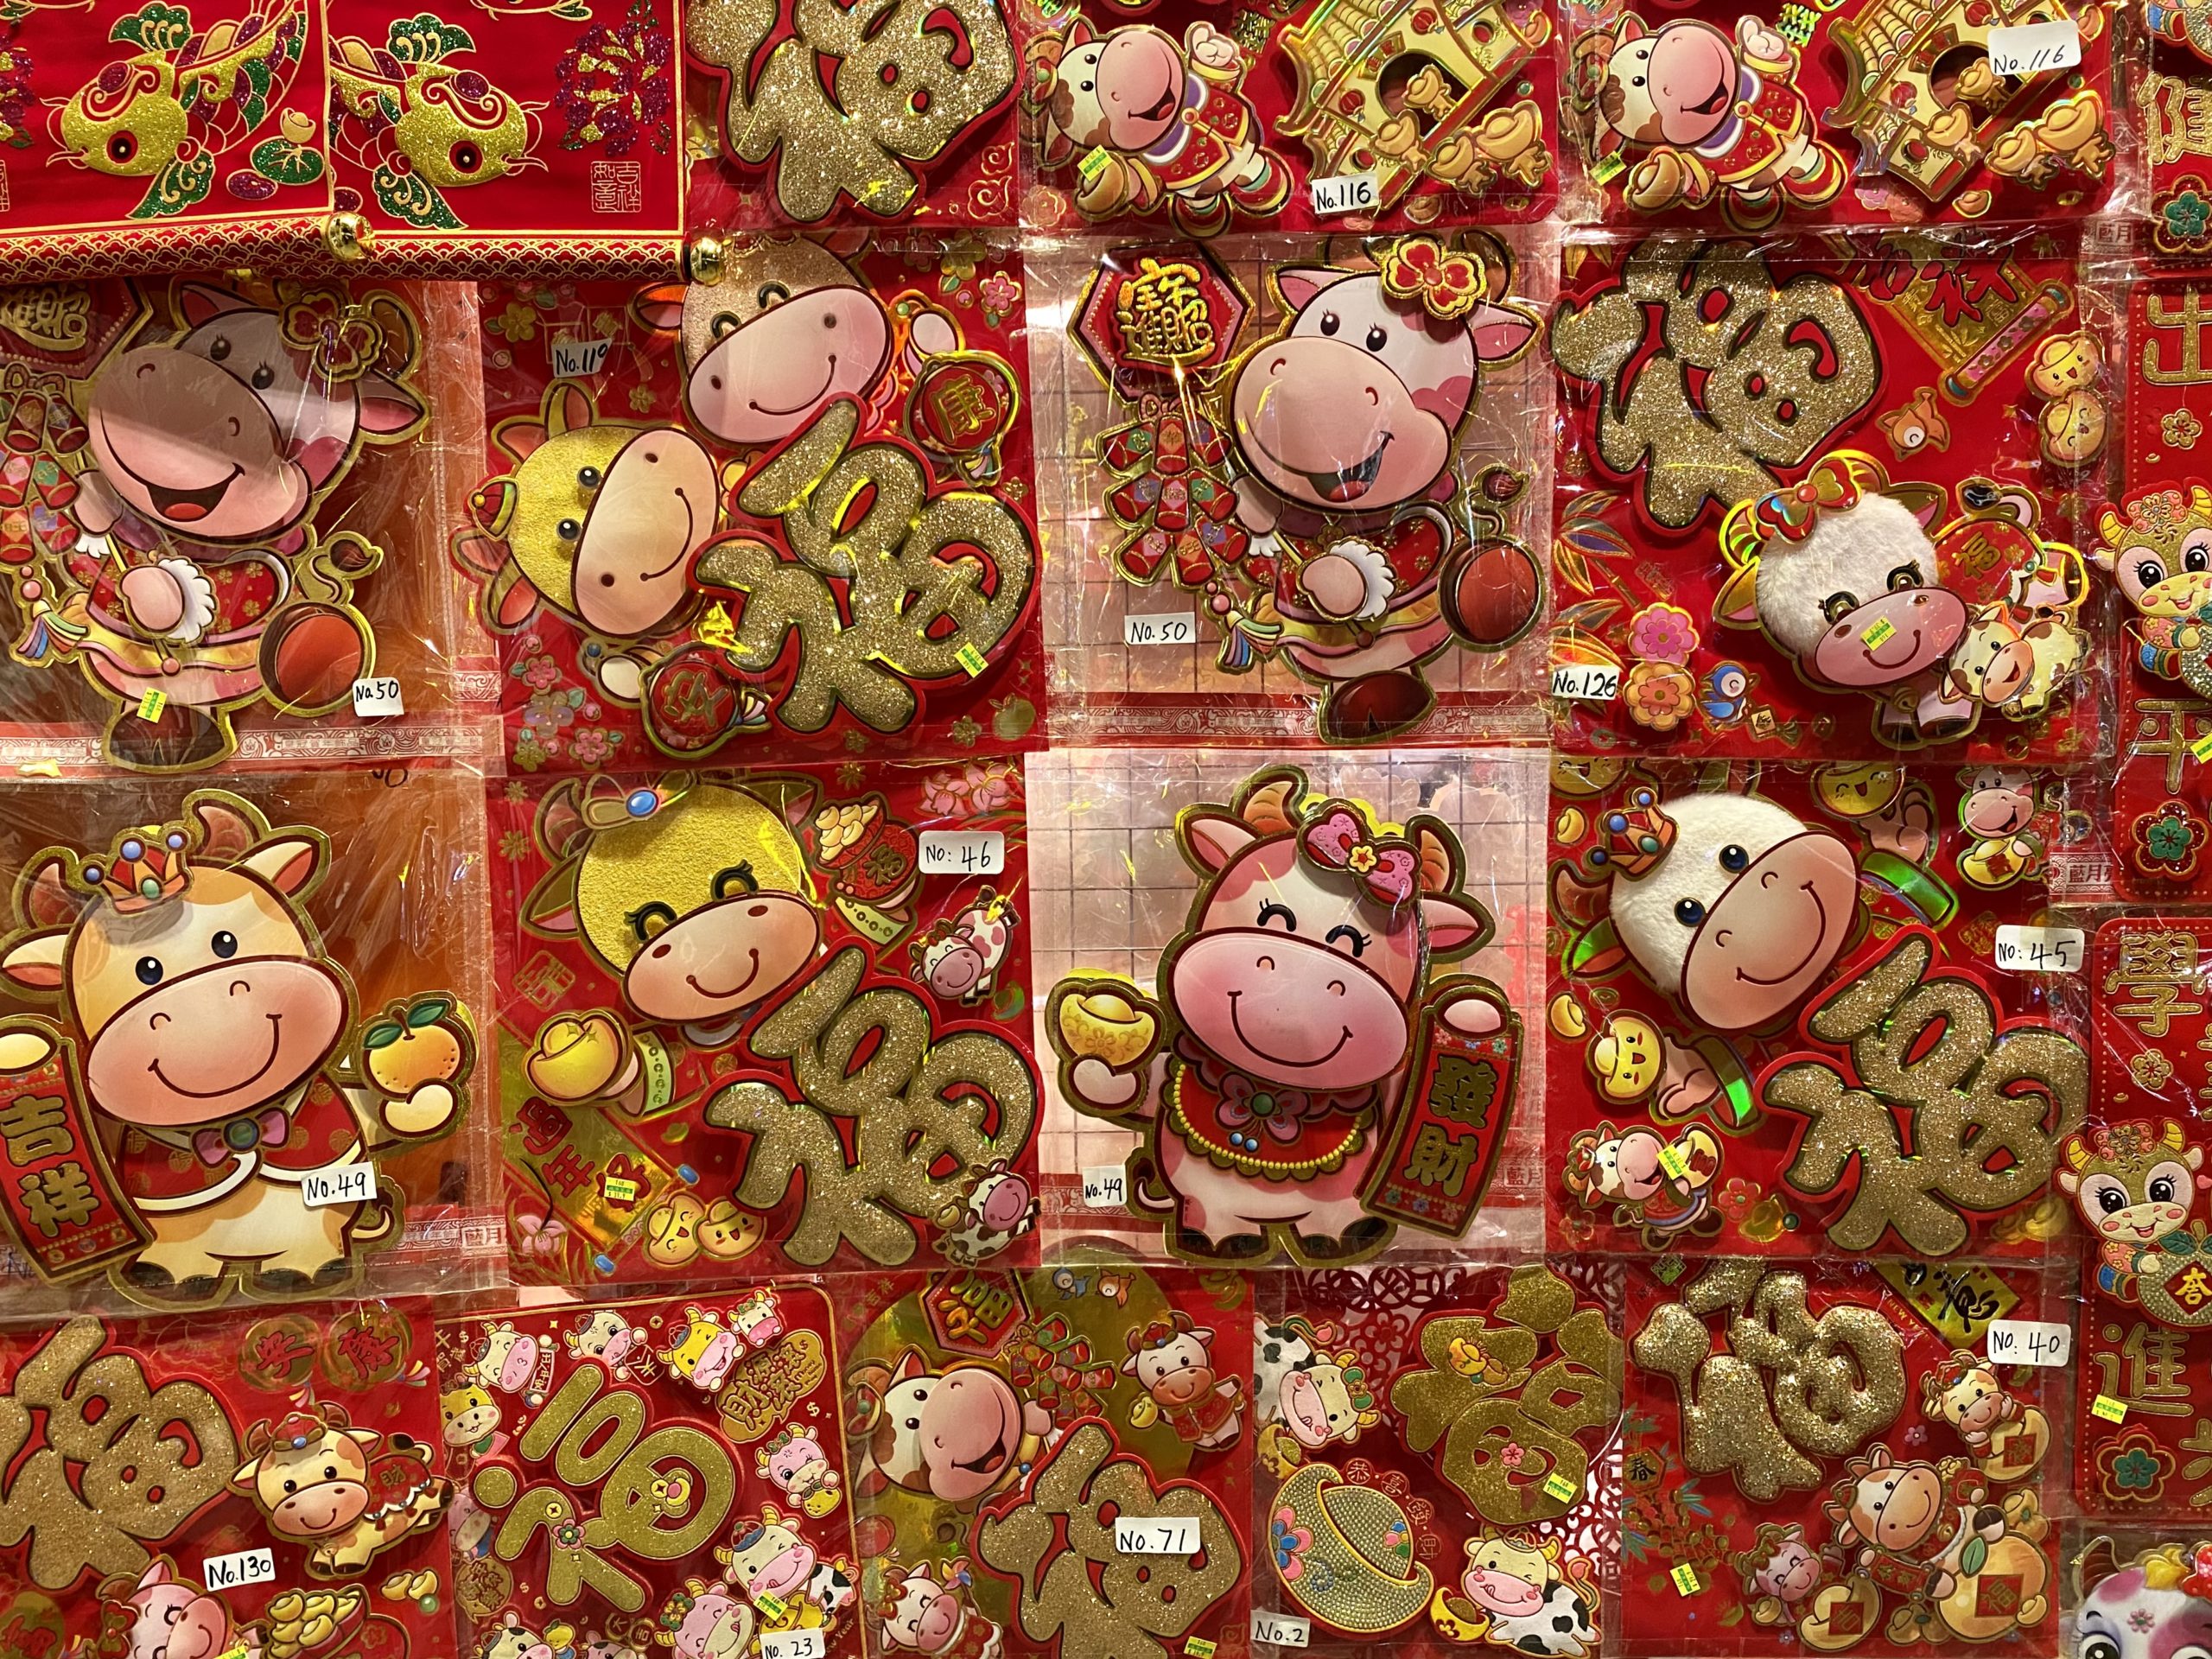 Happy Lunar New Year! All You Need to Know About The Year of the